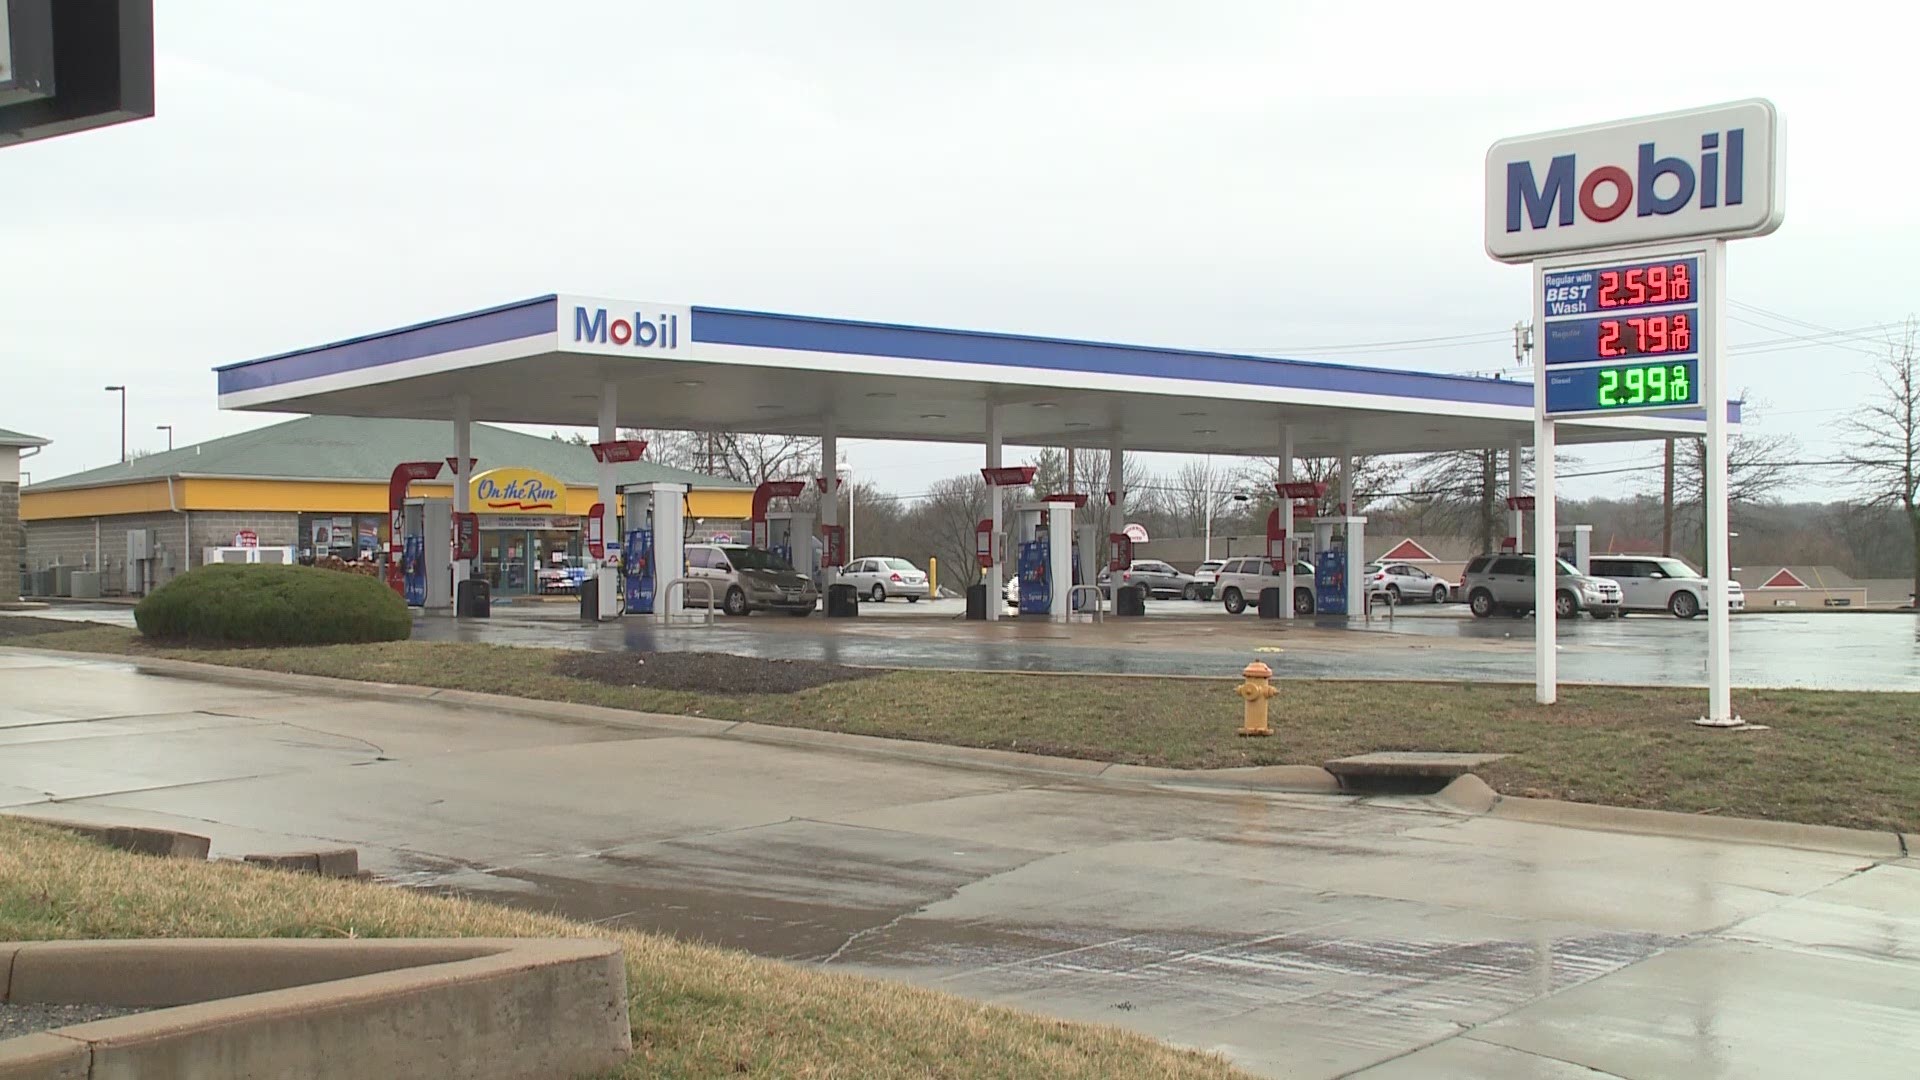 The winning jackpot ticket for $5.2 million was sold at Kingshighway Mobil on 707 N. Kingshighway Boulevard